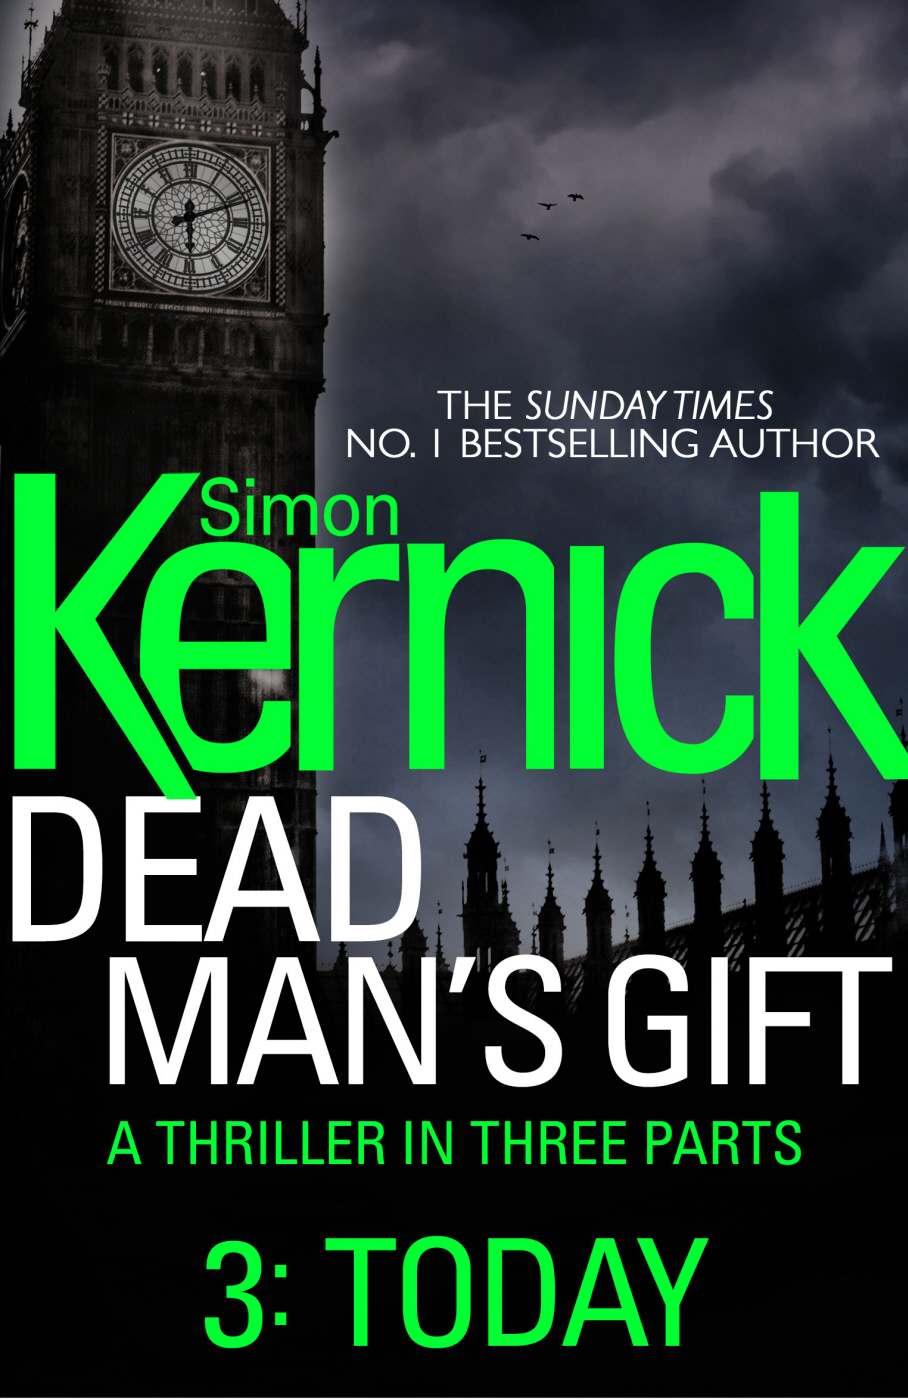 Dead Man's Gift 03 - Today by Simon Kernick